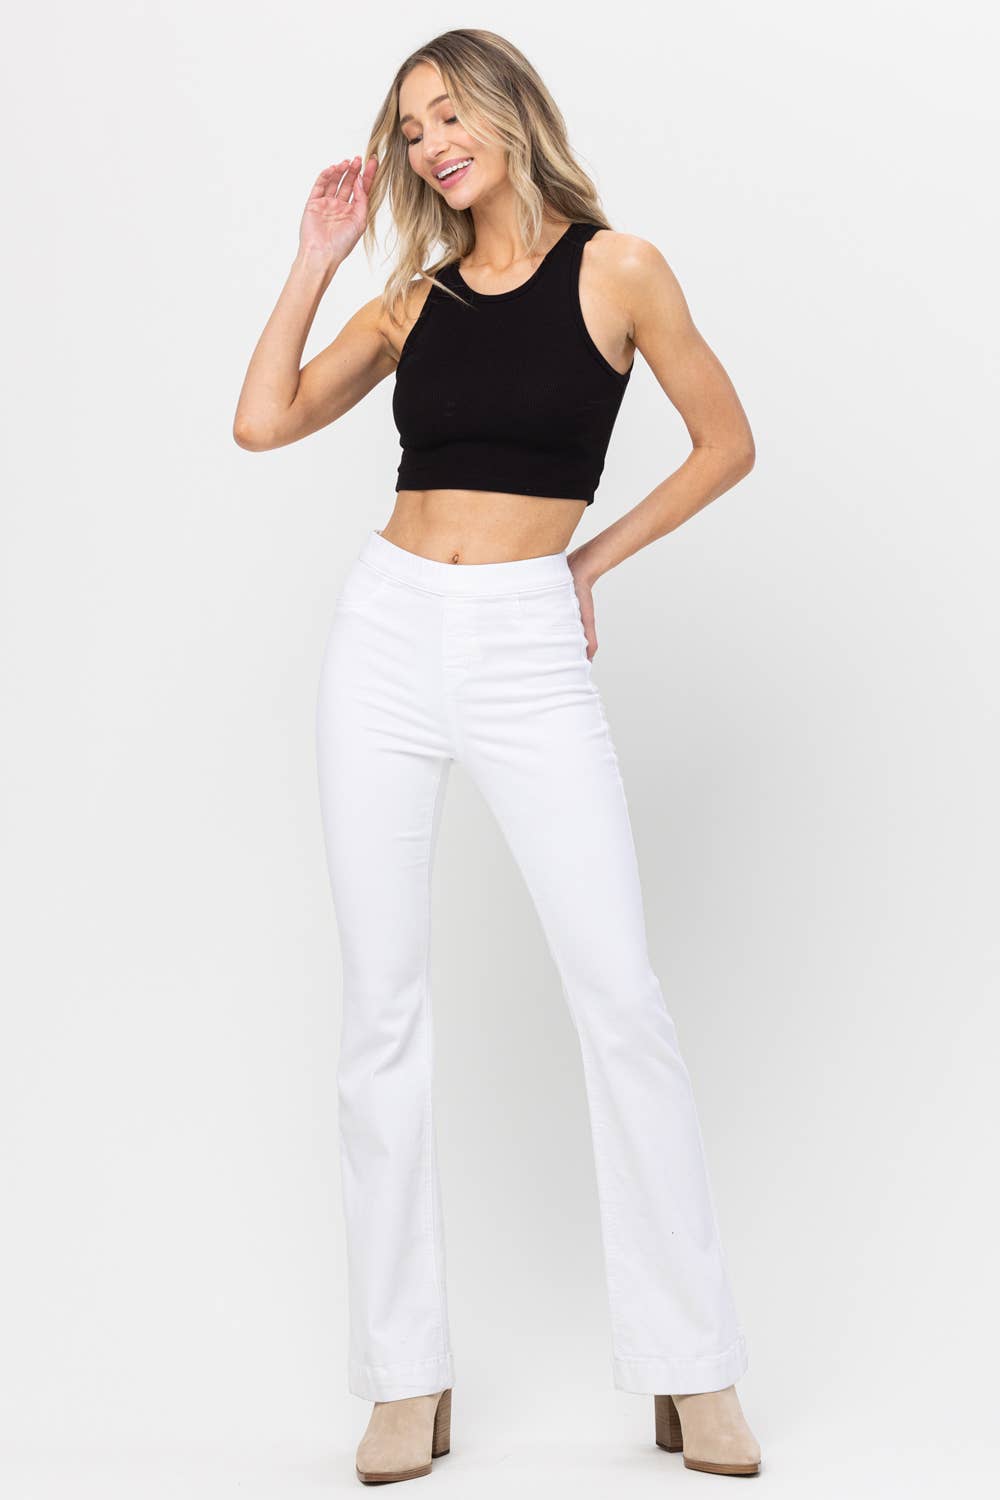 High Rise White Pull On Flares by Jelly Jeans